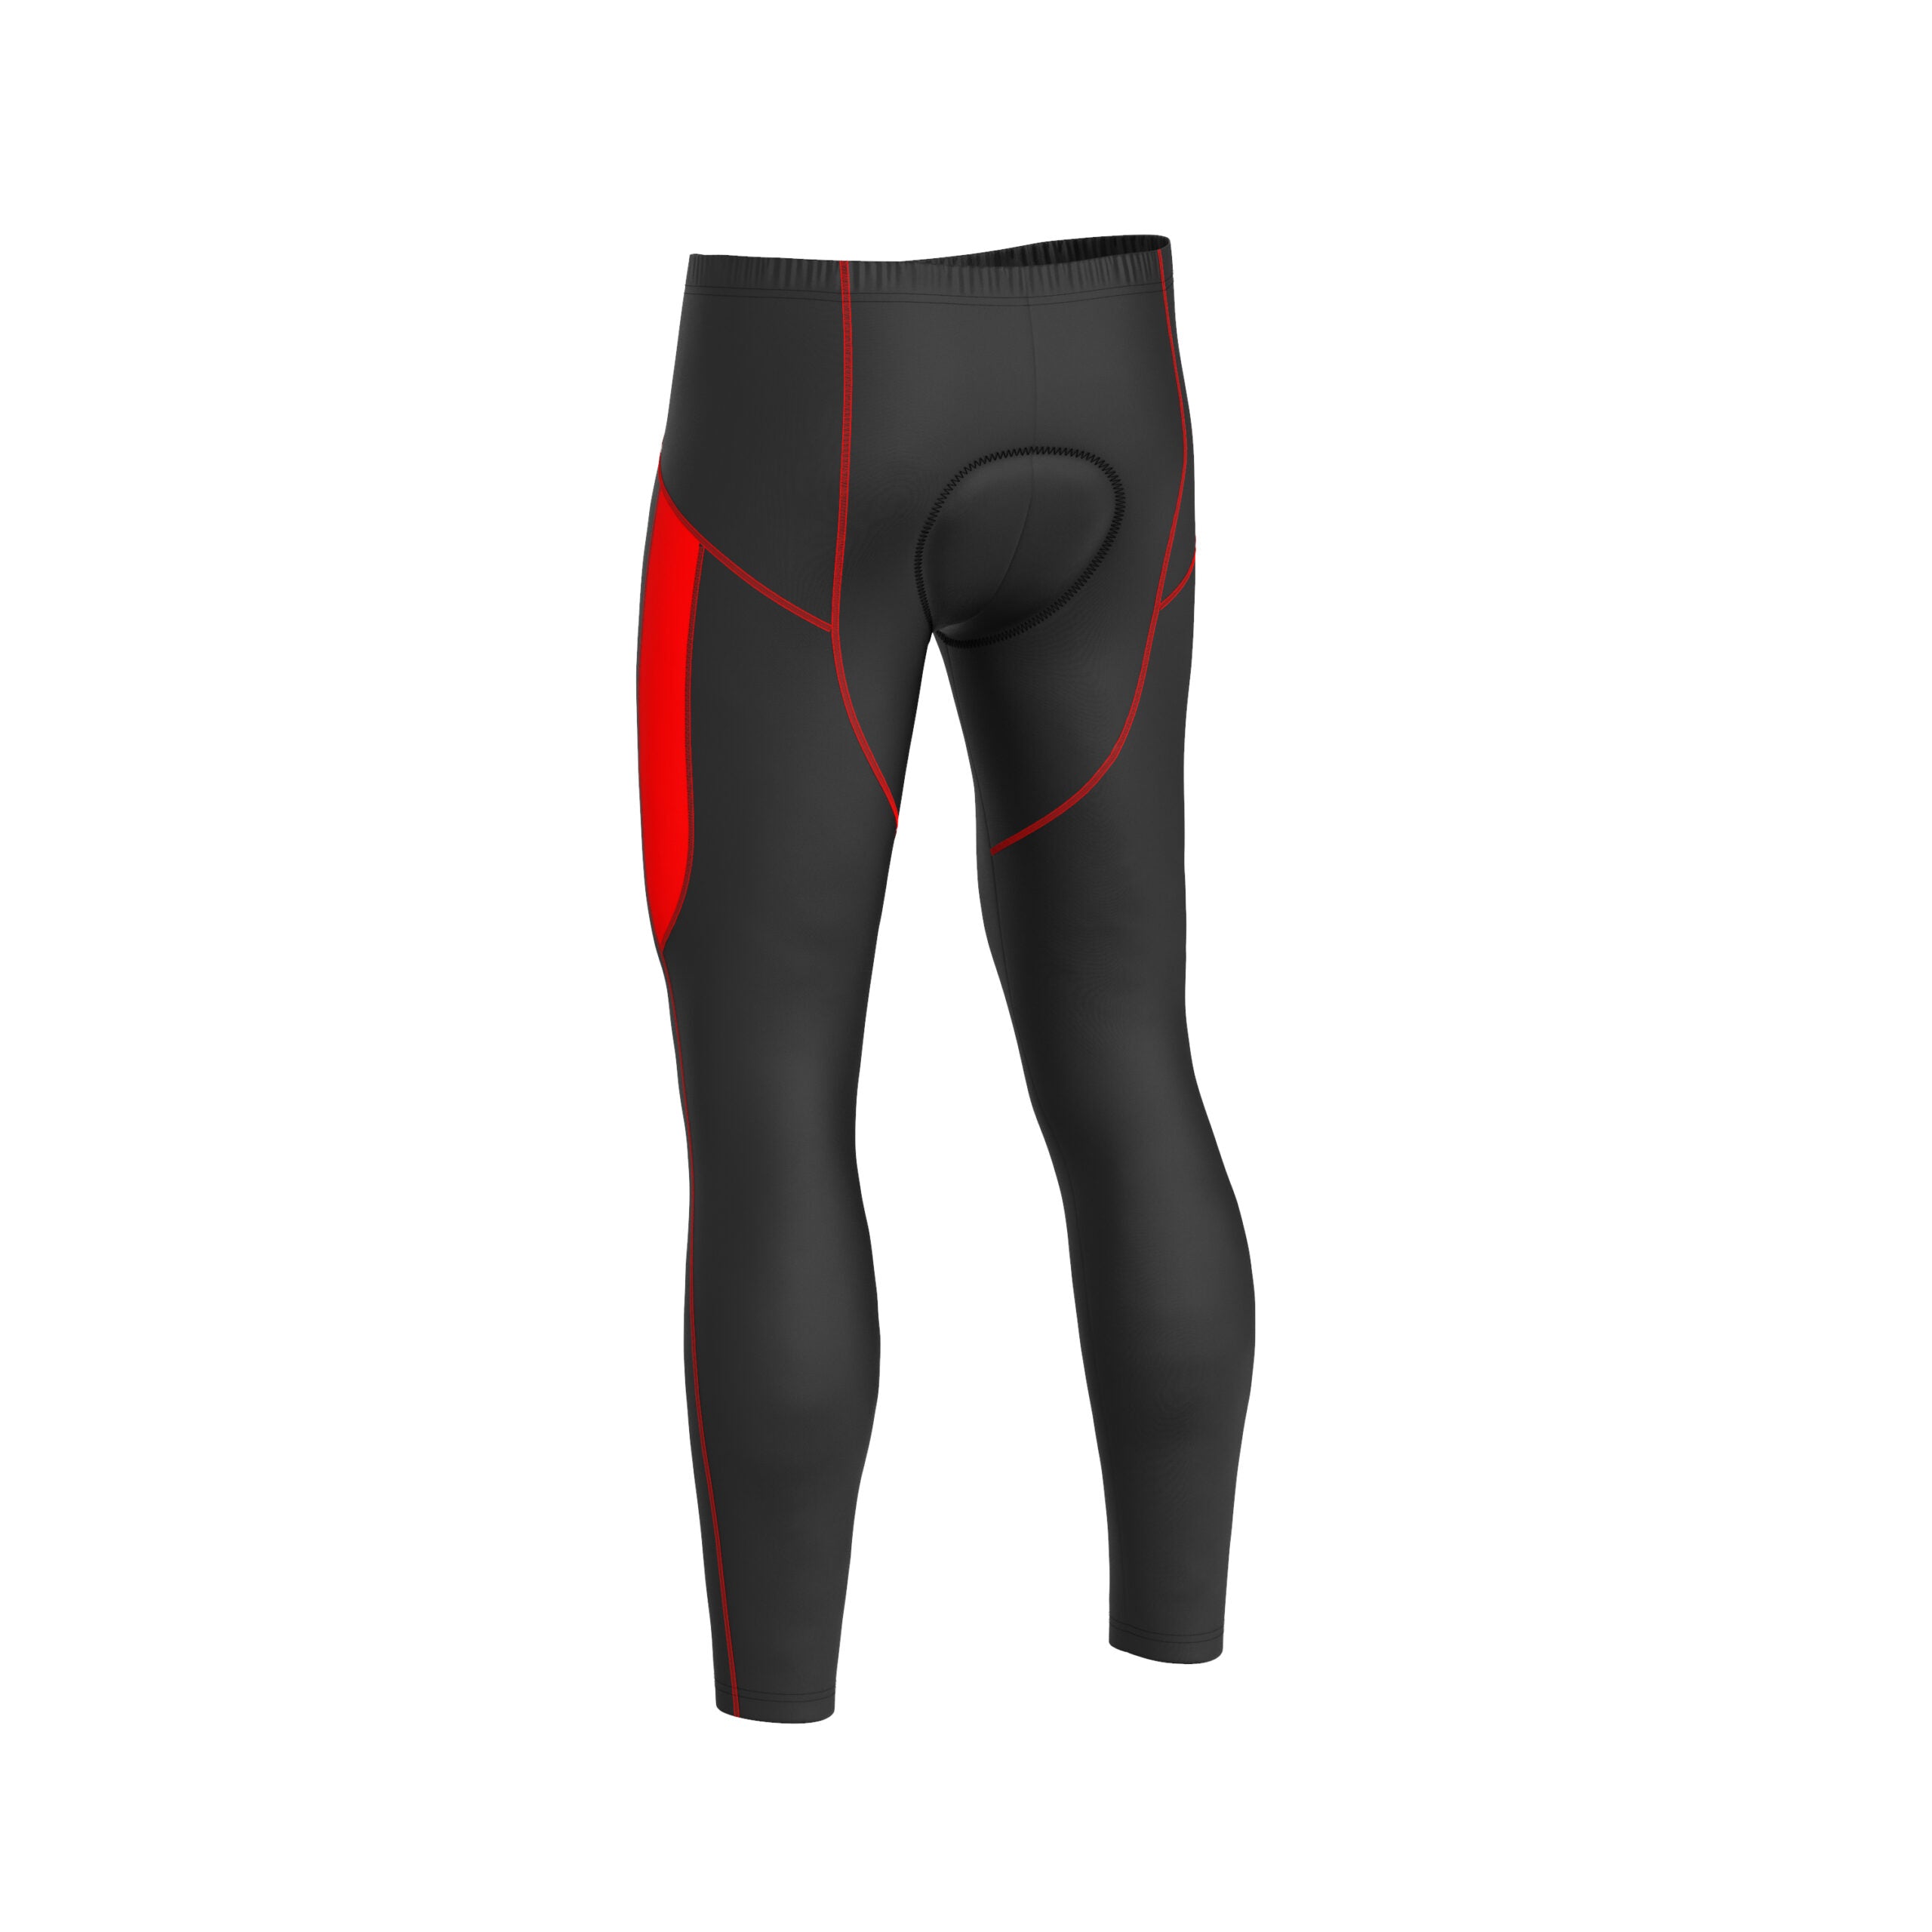 red 3/4th cycling tights with chamois pad